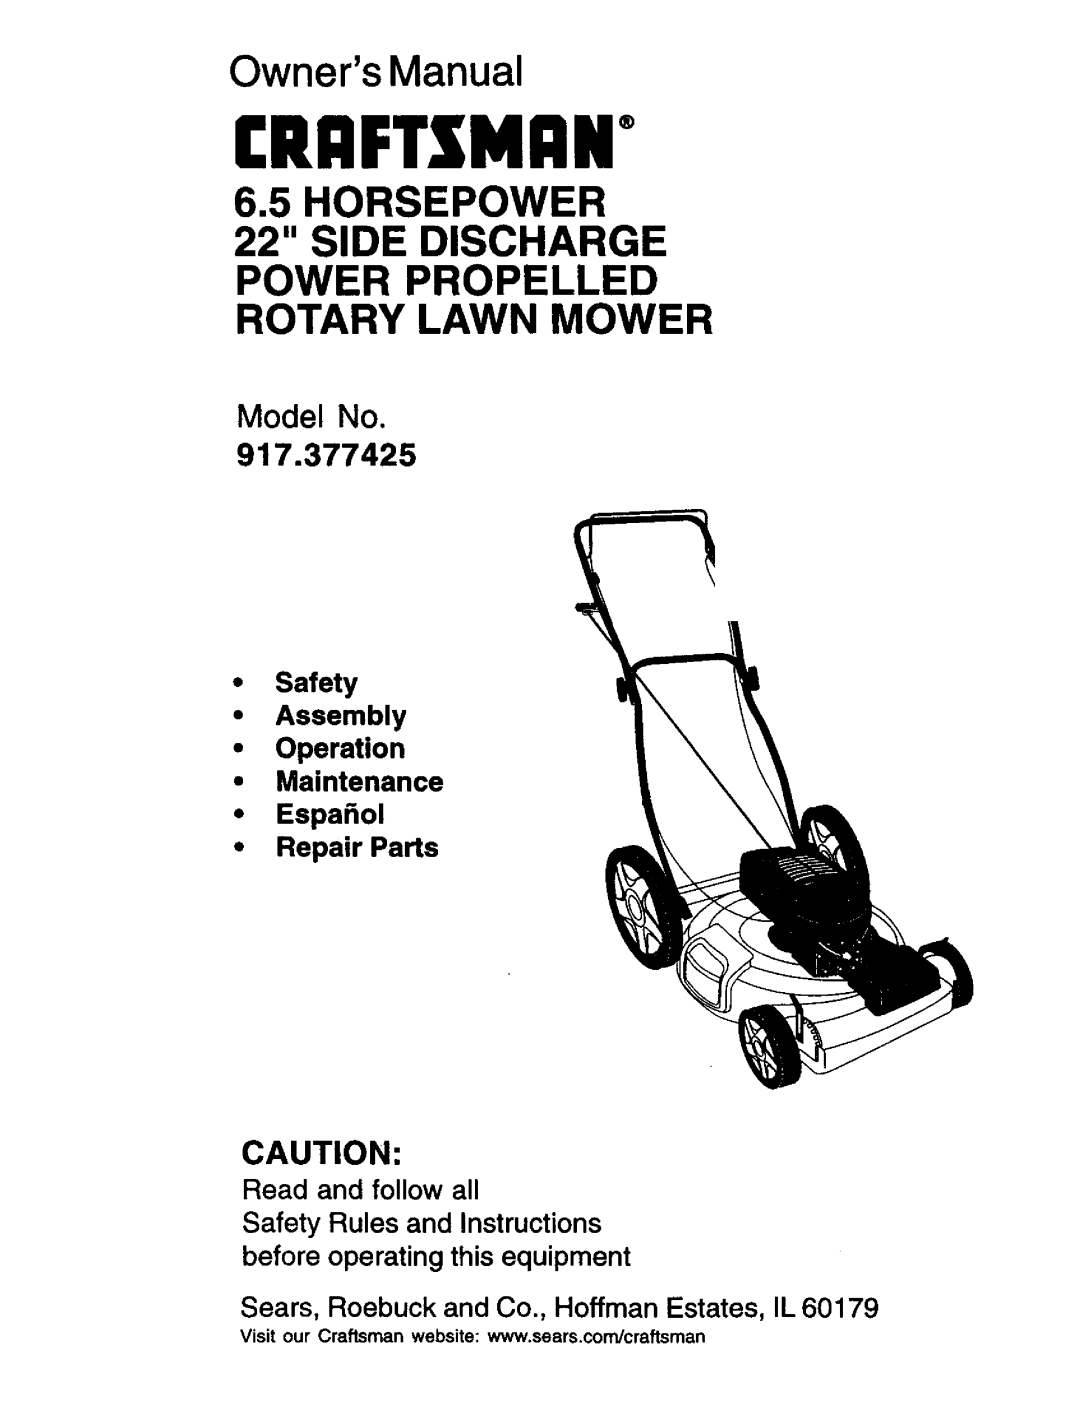 Craftsman 917.377425 owner manual Sears, Roebuck and Co., Hoffman Estates, IL, Craftsman+, OwnersManual, Rotary Lawn Mower 